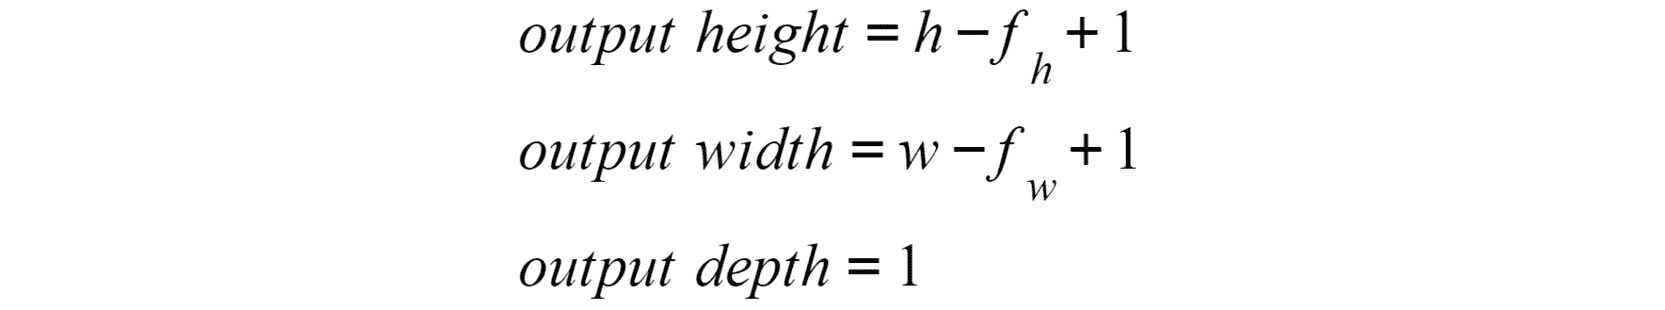 Figure 4.7: Output height, width, and depth of a convolutional layer 